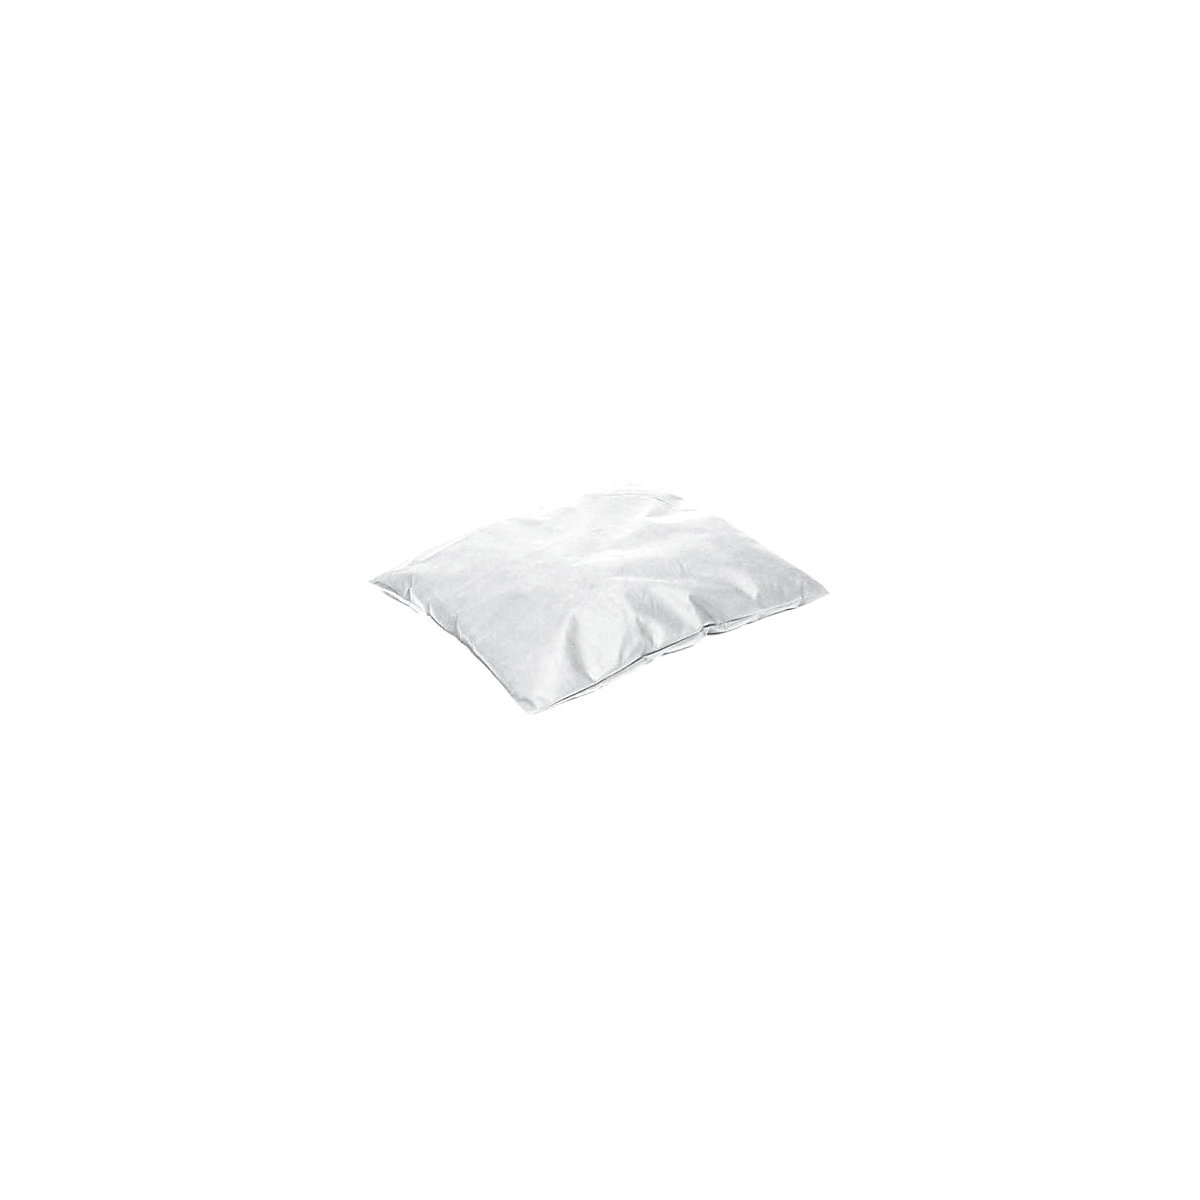 Absorbent fleece cushion, oil version, 600 x 800 mm, white, pack of 4-7